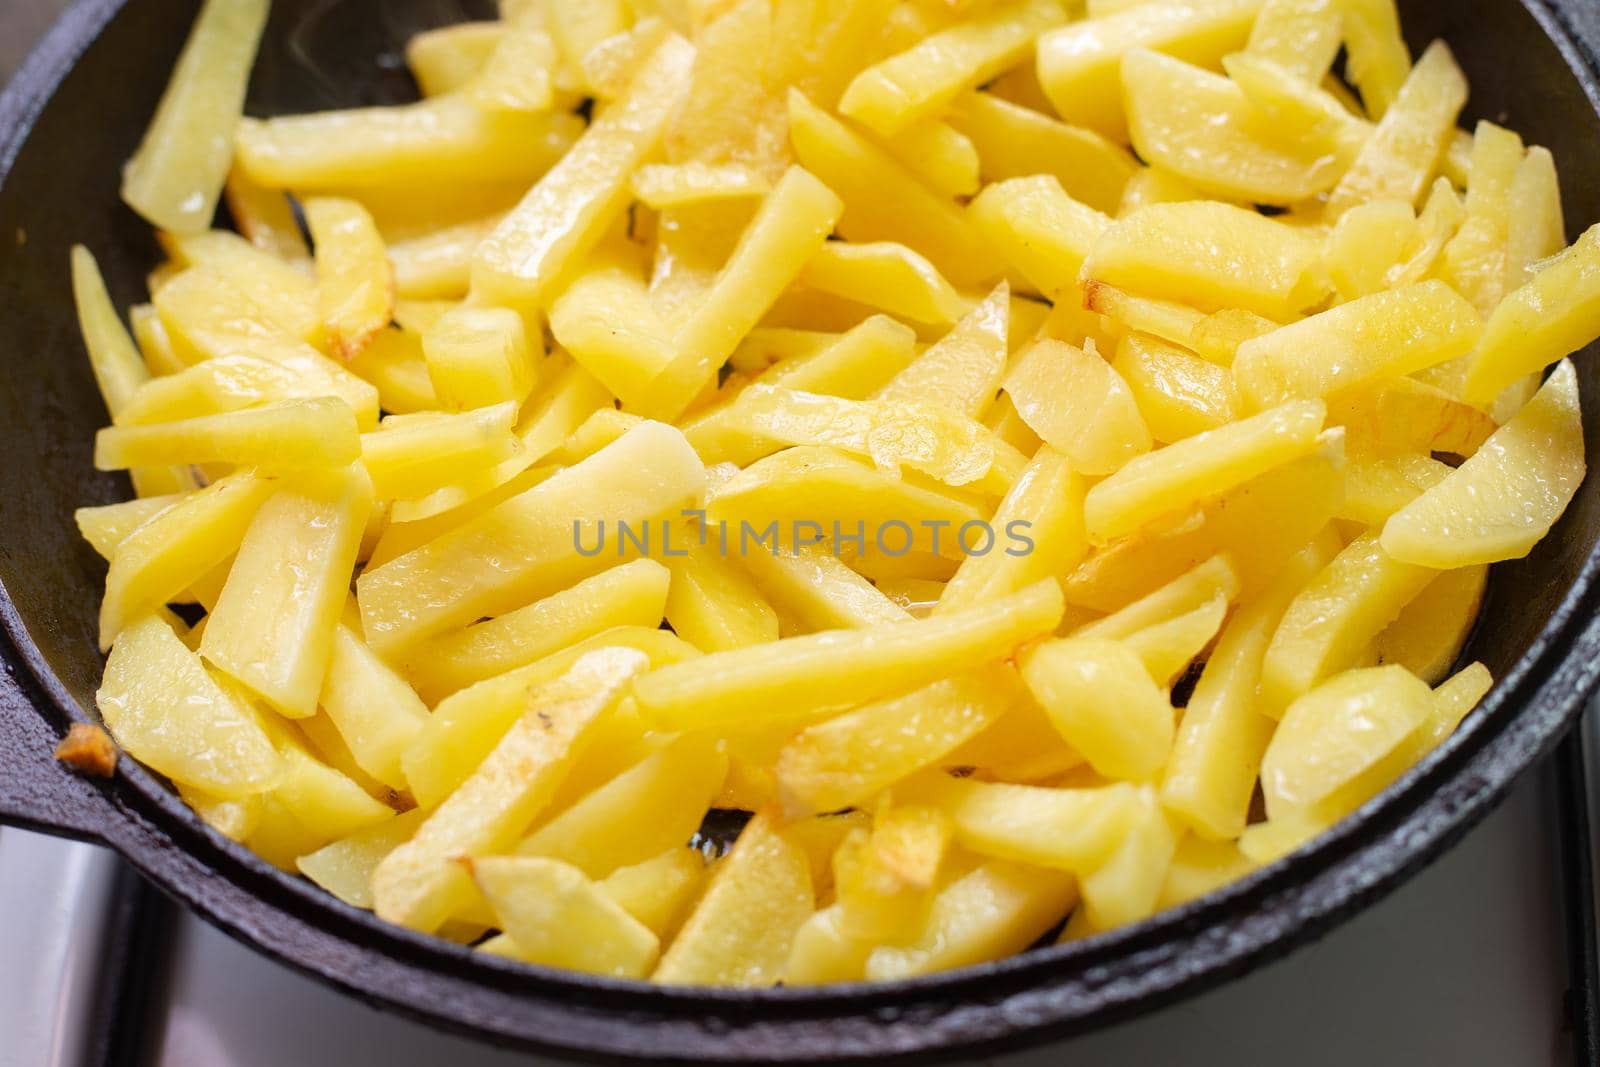 Potatoes cut into strips are fried in a pan. Delicious vegetable dish.